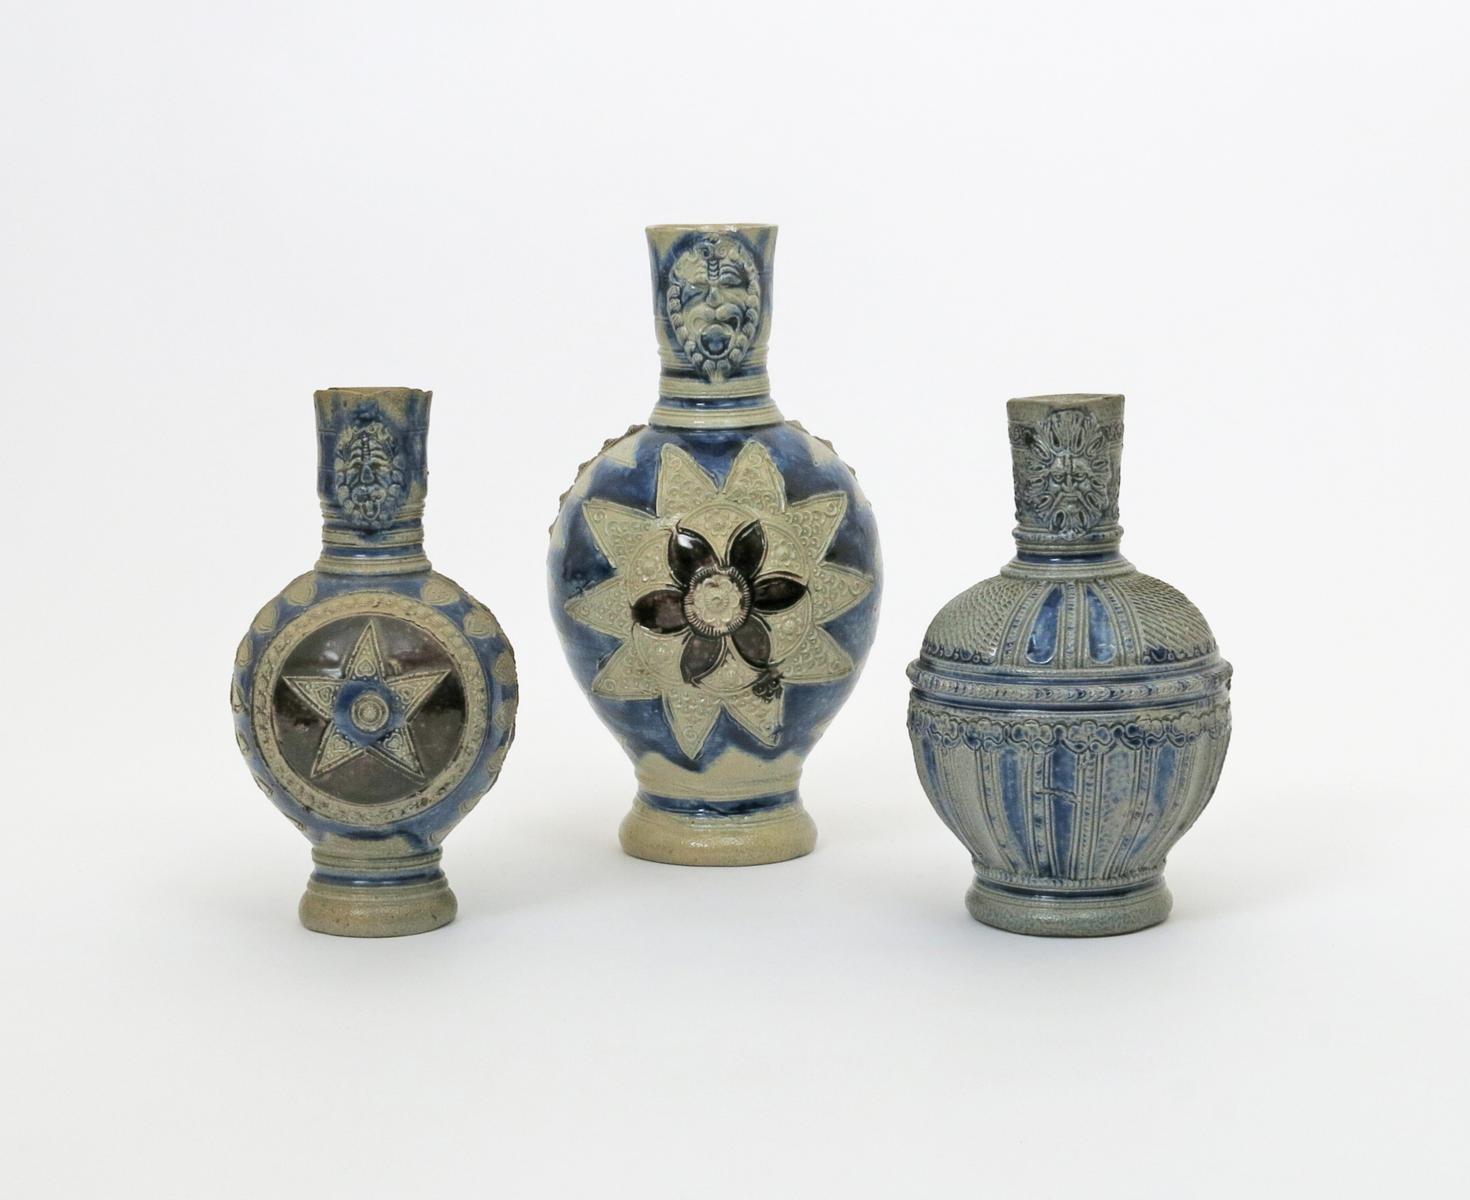 Three Westerwald stoneware mask jugs, 17th/18th century, two decorated with a large star-shaped